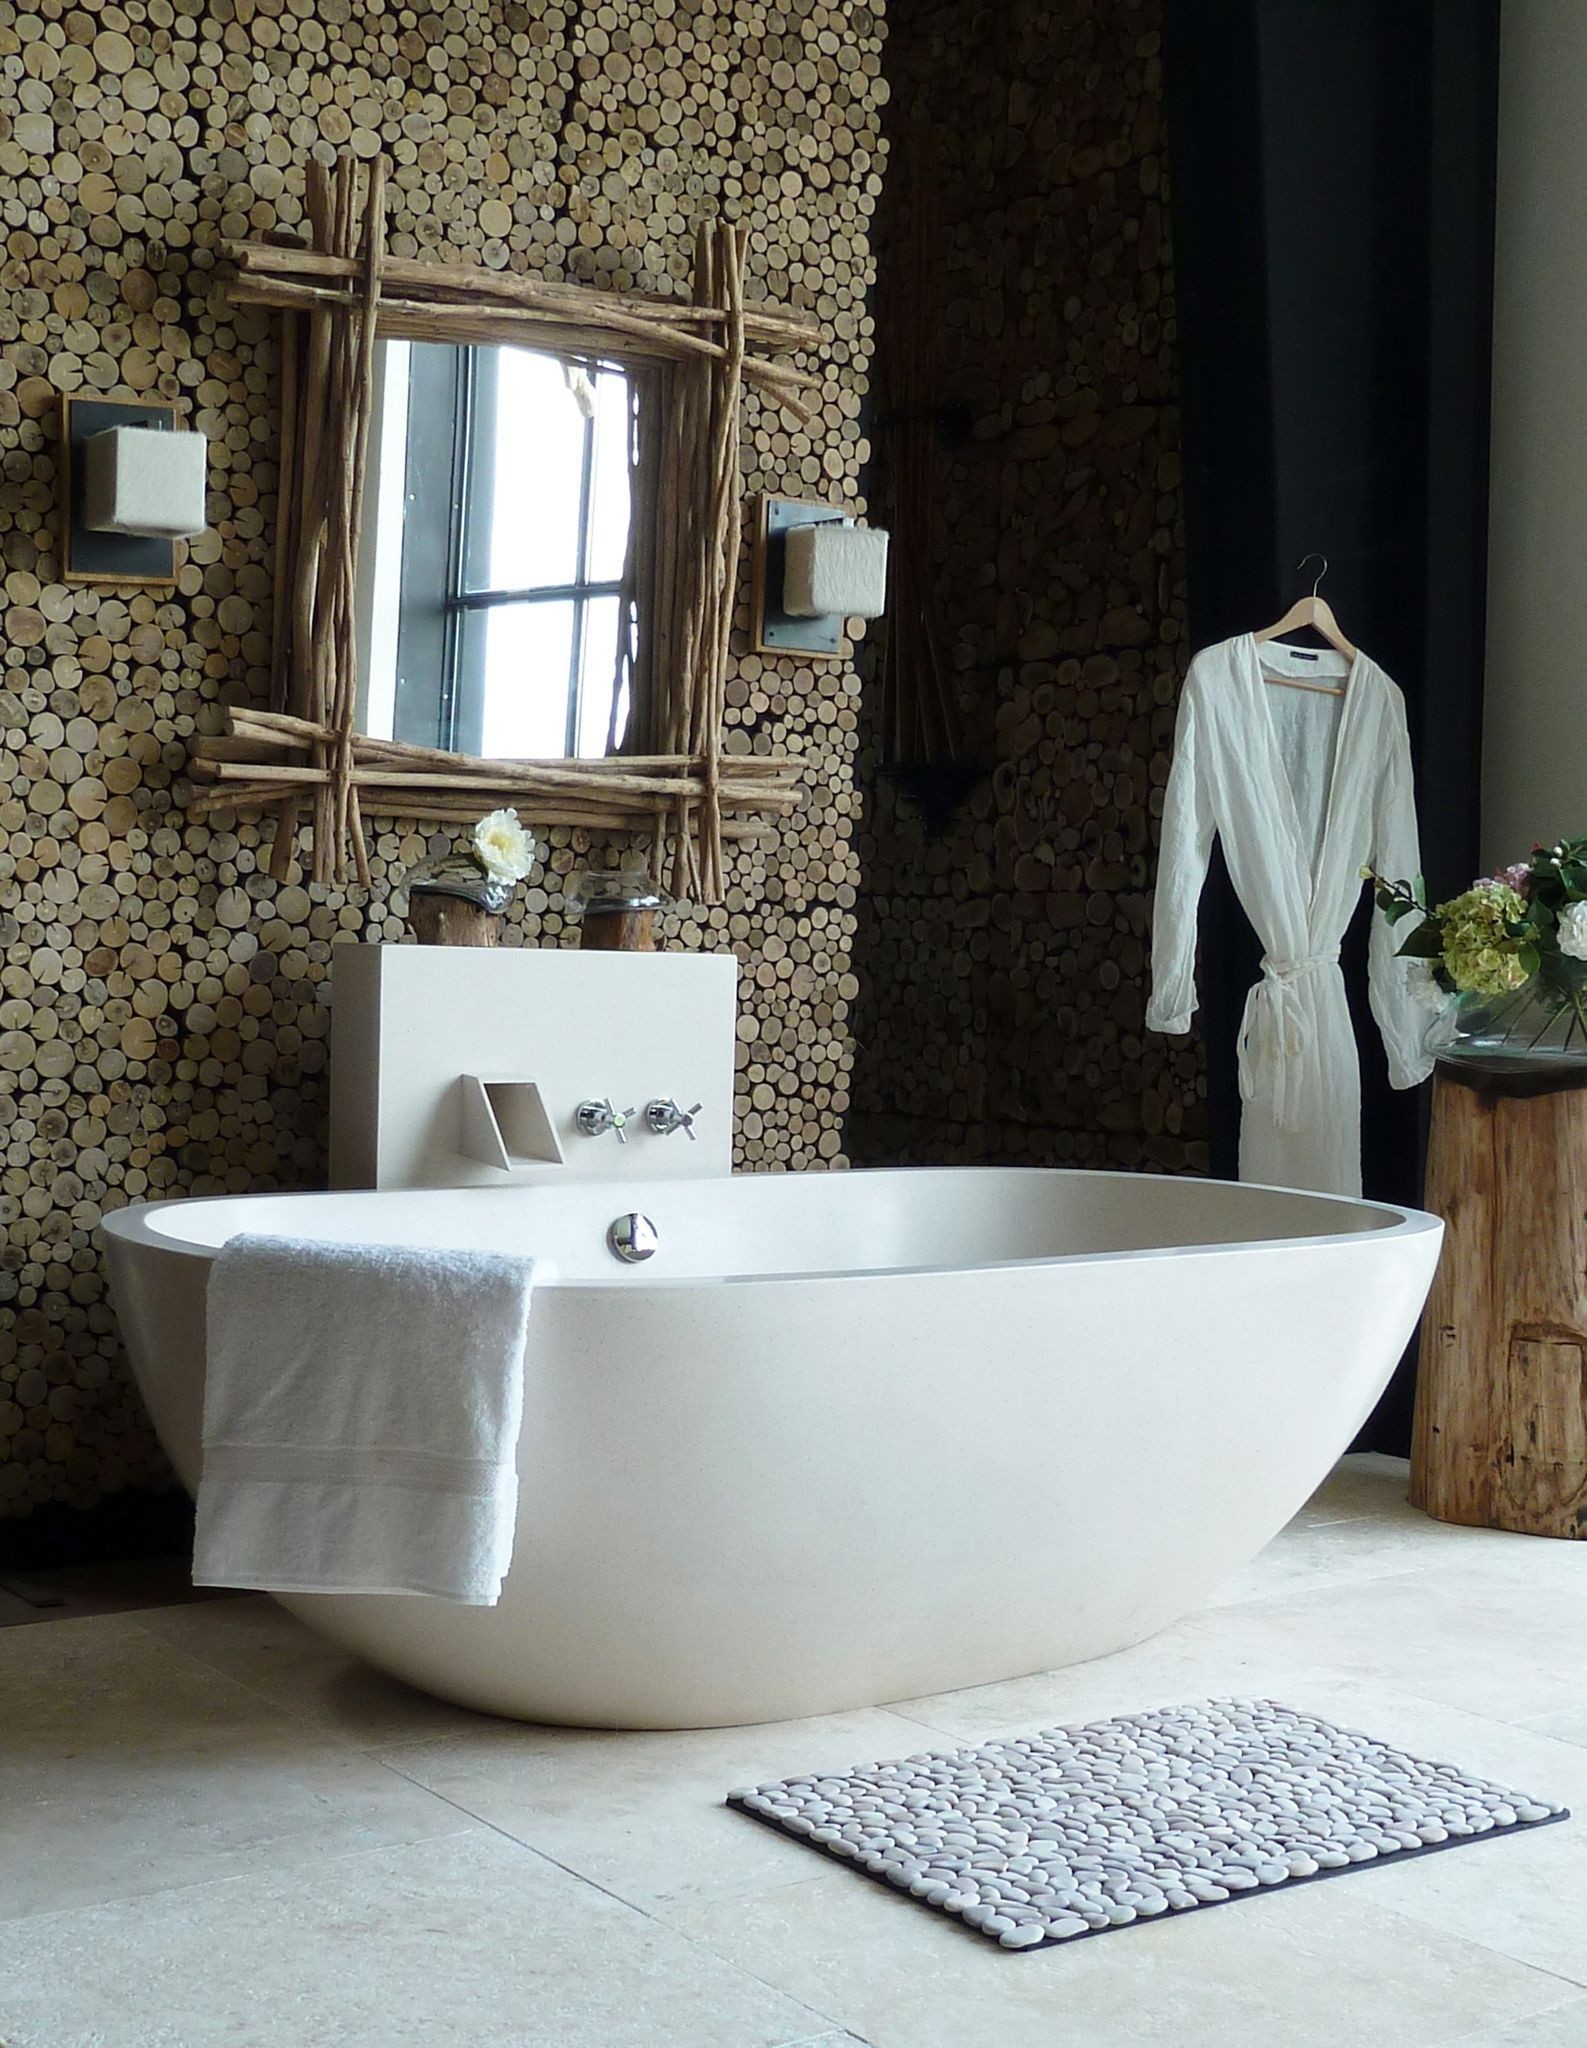 Add a touch of spa style to your bathroom with